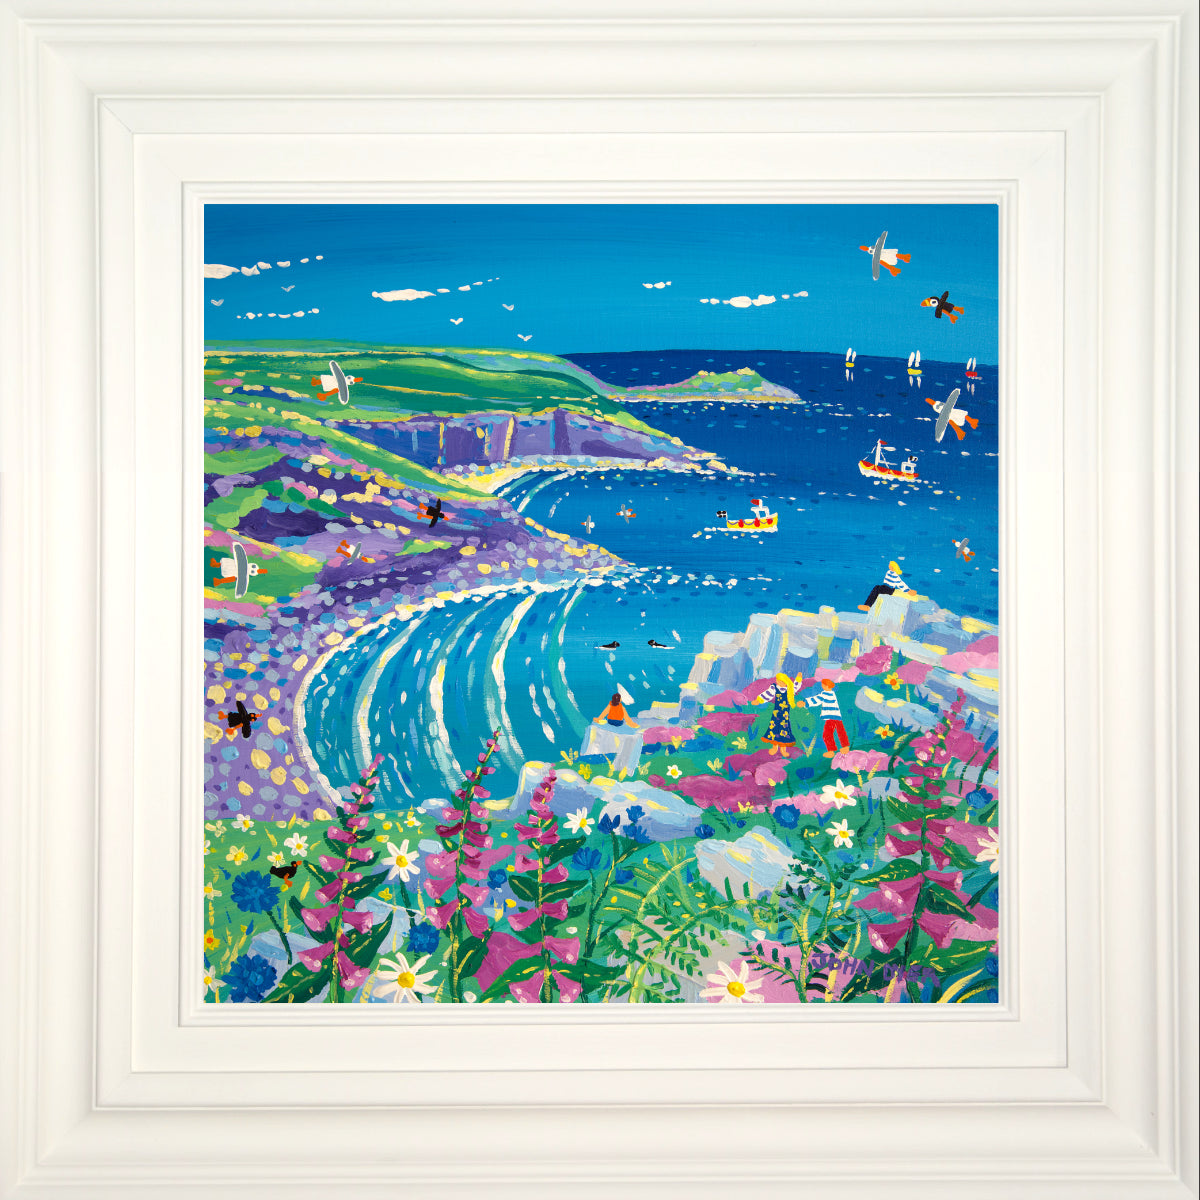 The stunning coastline at Zennor Head has been captured by artist John Dyer in this new Cornish painting. Foxgloves and ferns fill the foreground and a family relax on the rugged rocks beside the cliff listening to the sea as it gently laps onto the rocks below. Seals, seagulls and fishing boats complete this delightful painting.